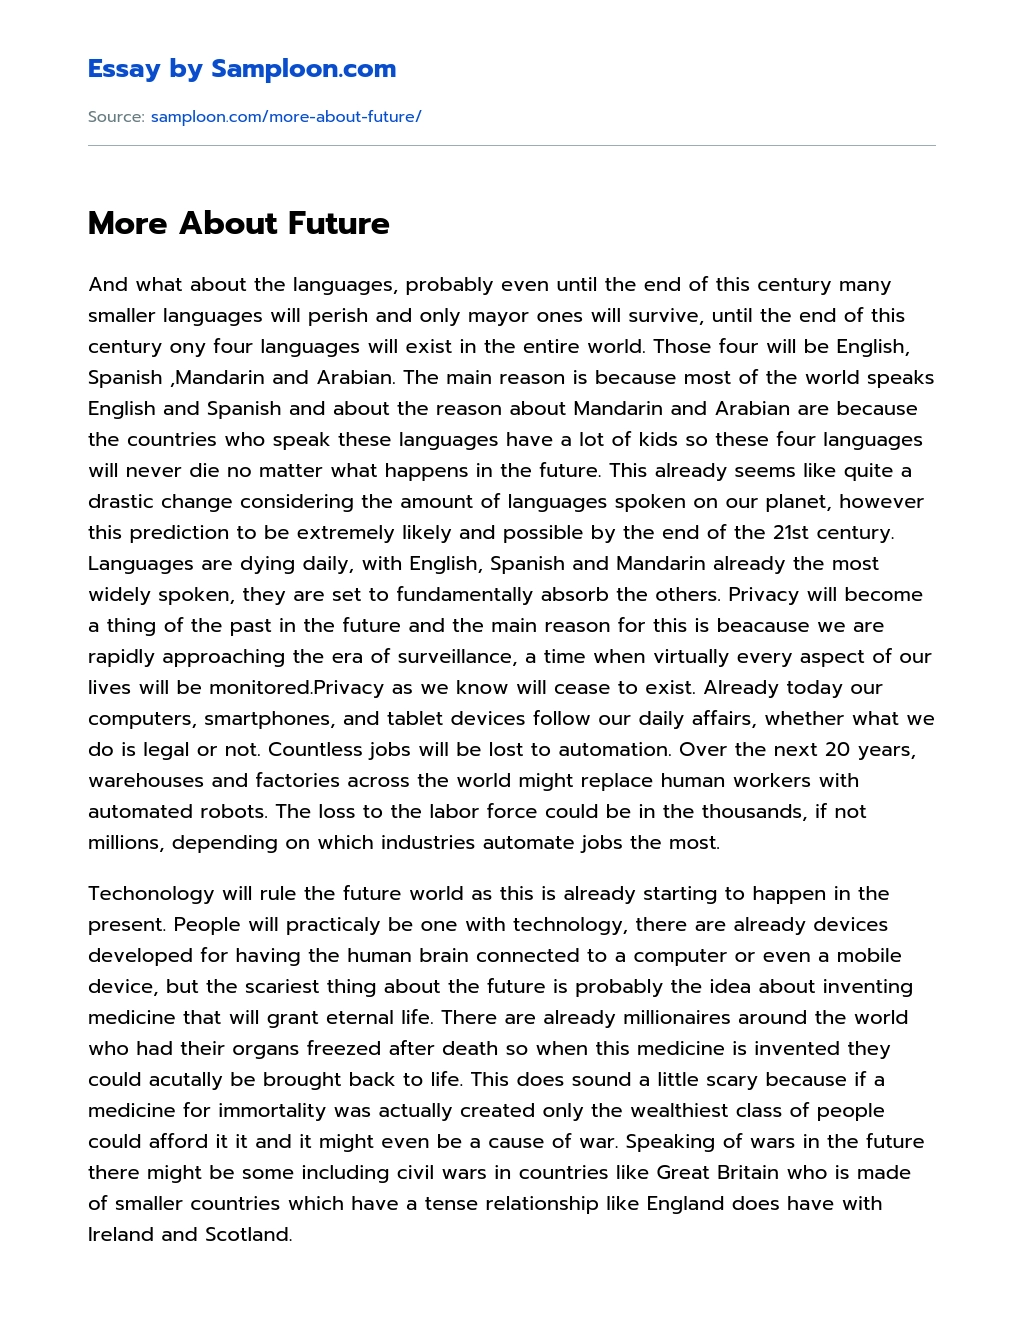 More About Future essay